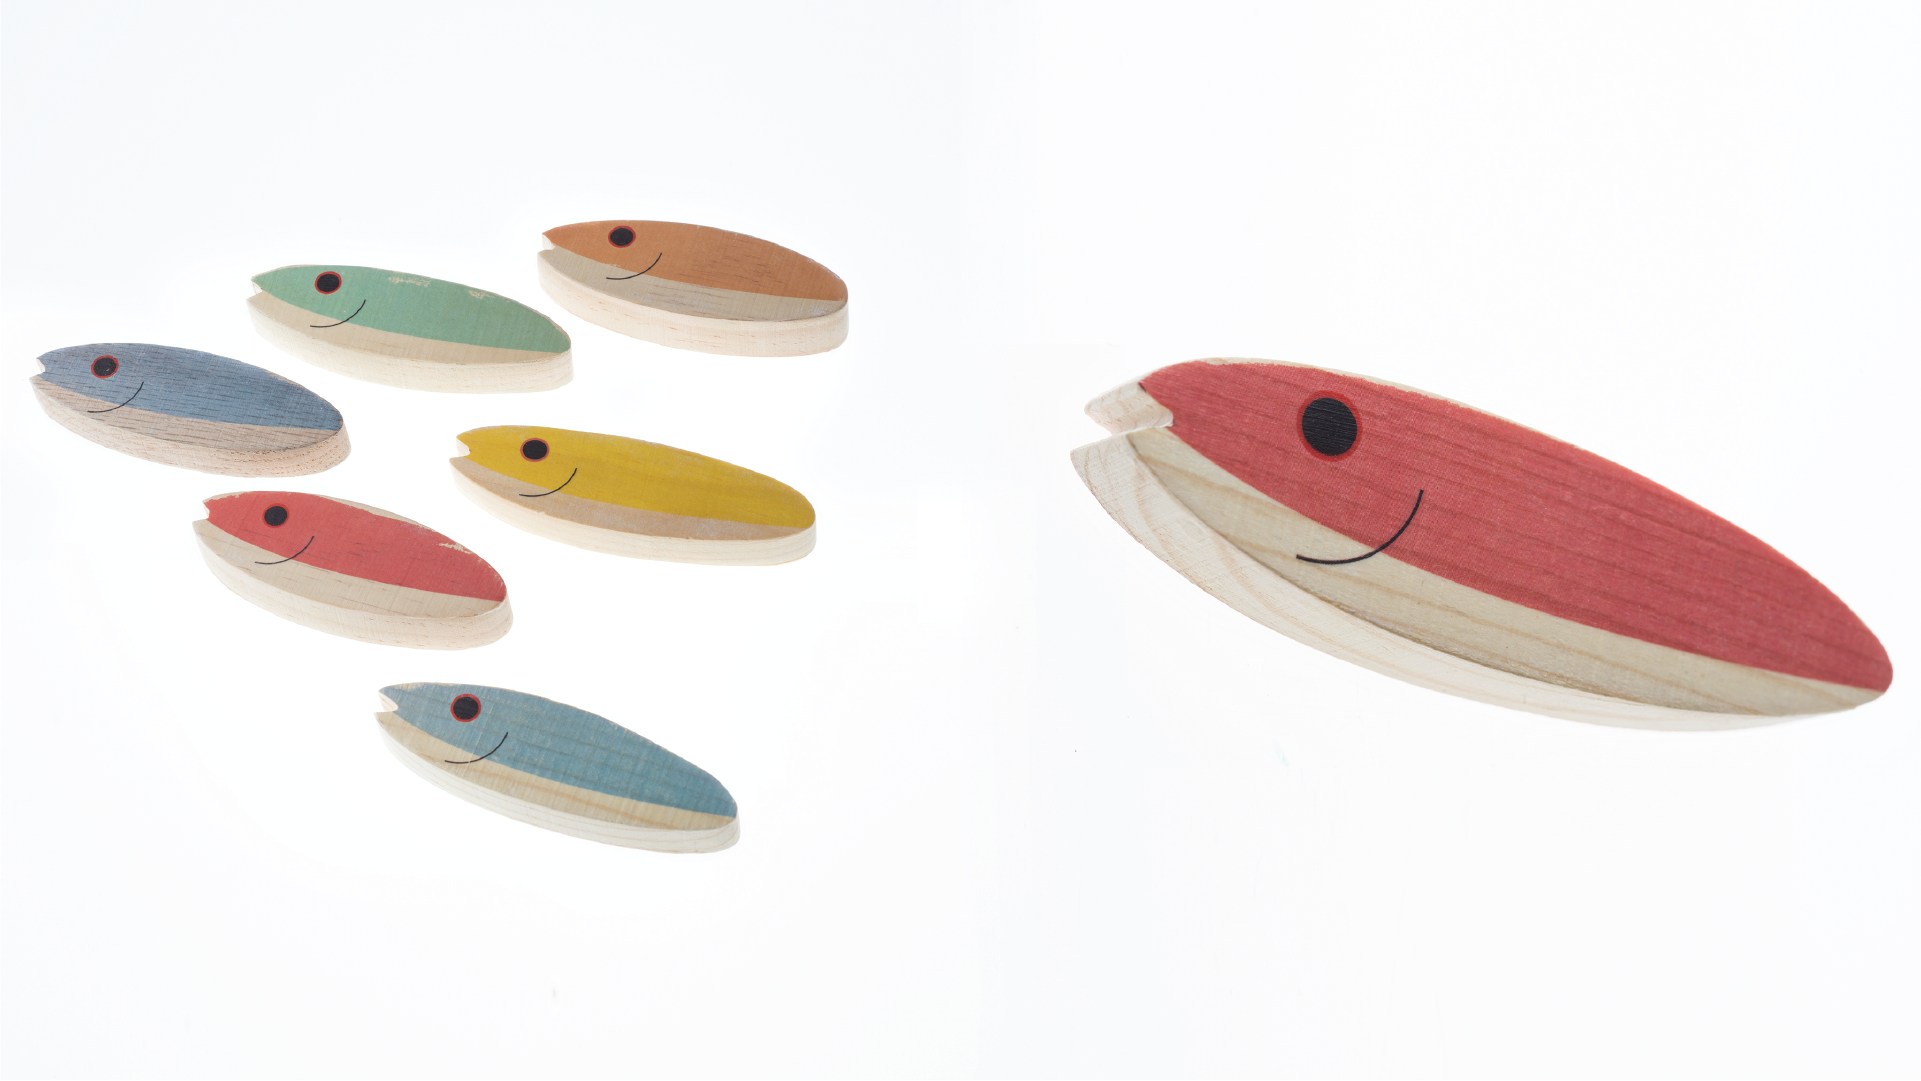 7 wooden toys in a shape of a fish in 4 different colors - red, blue, green and yellow.